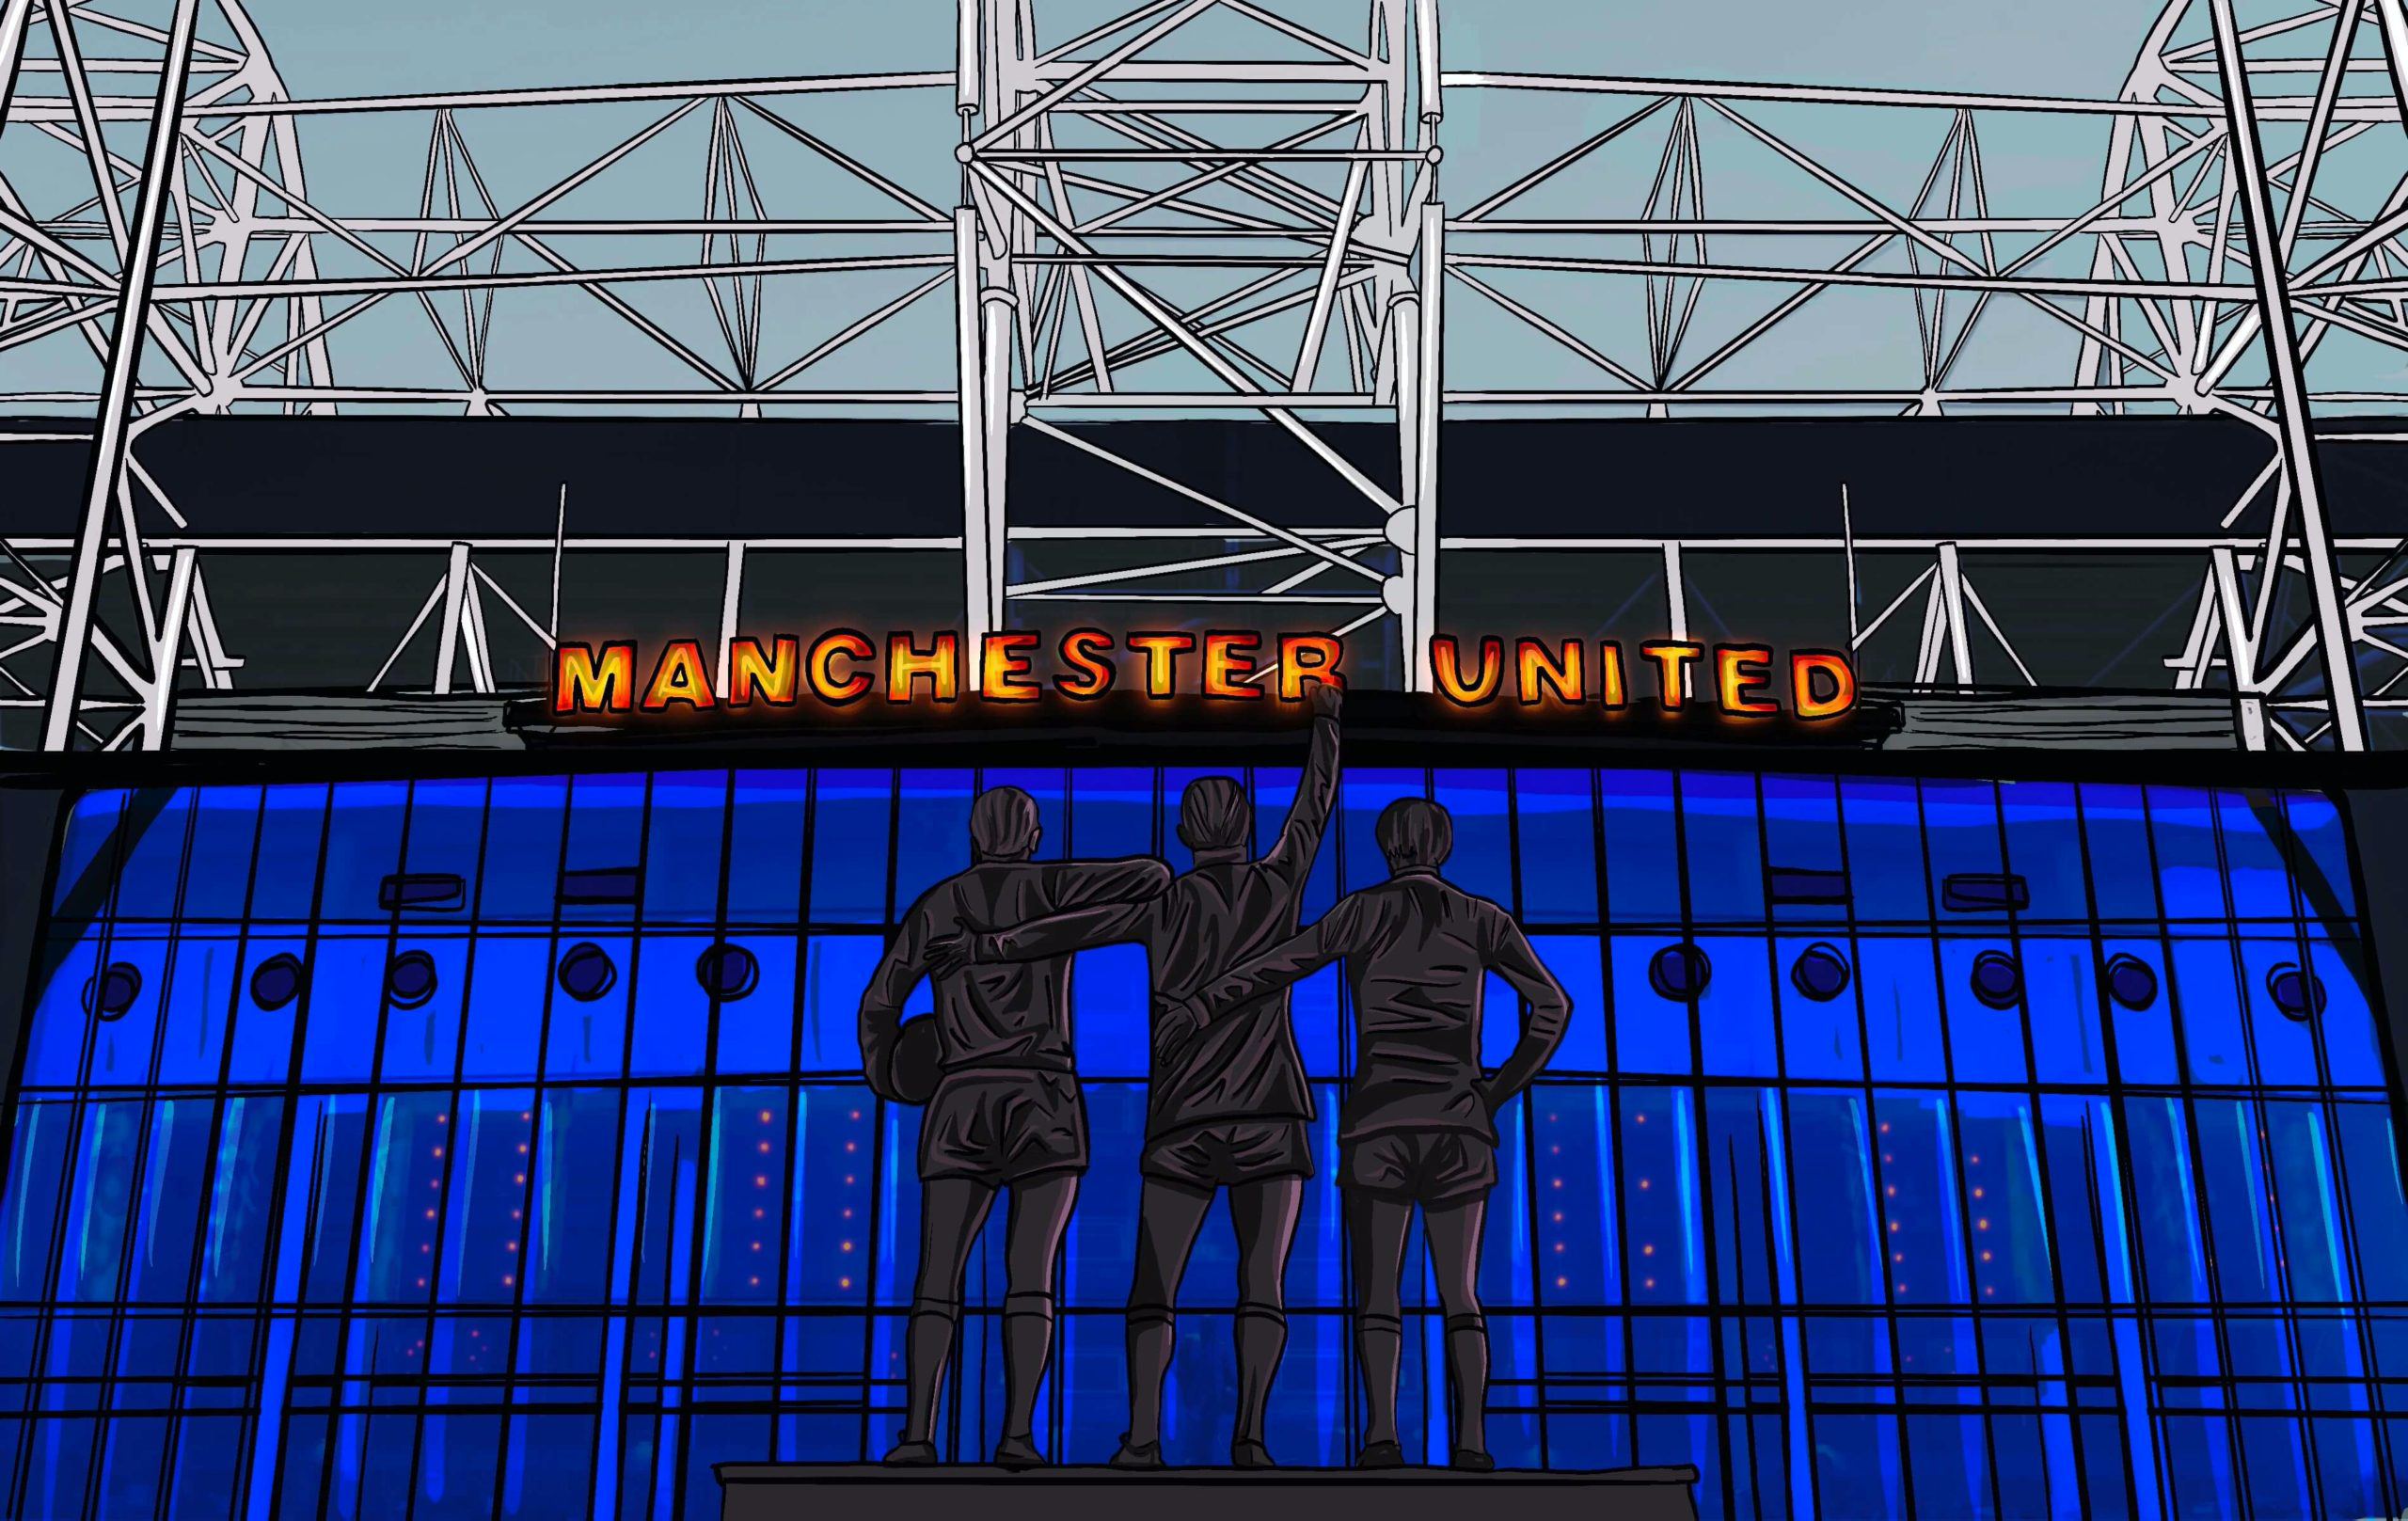 The statues outside Manchester United's Old Trafford stadium